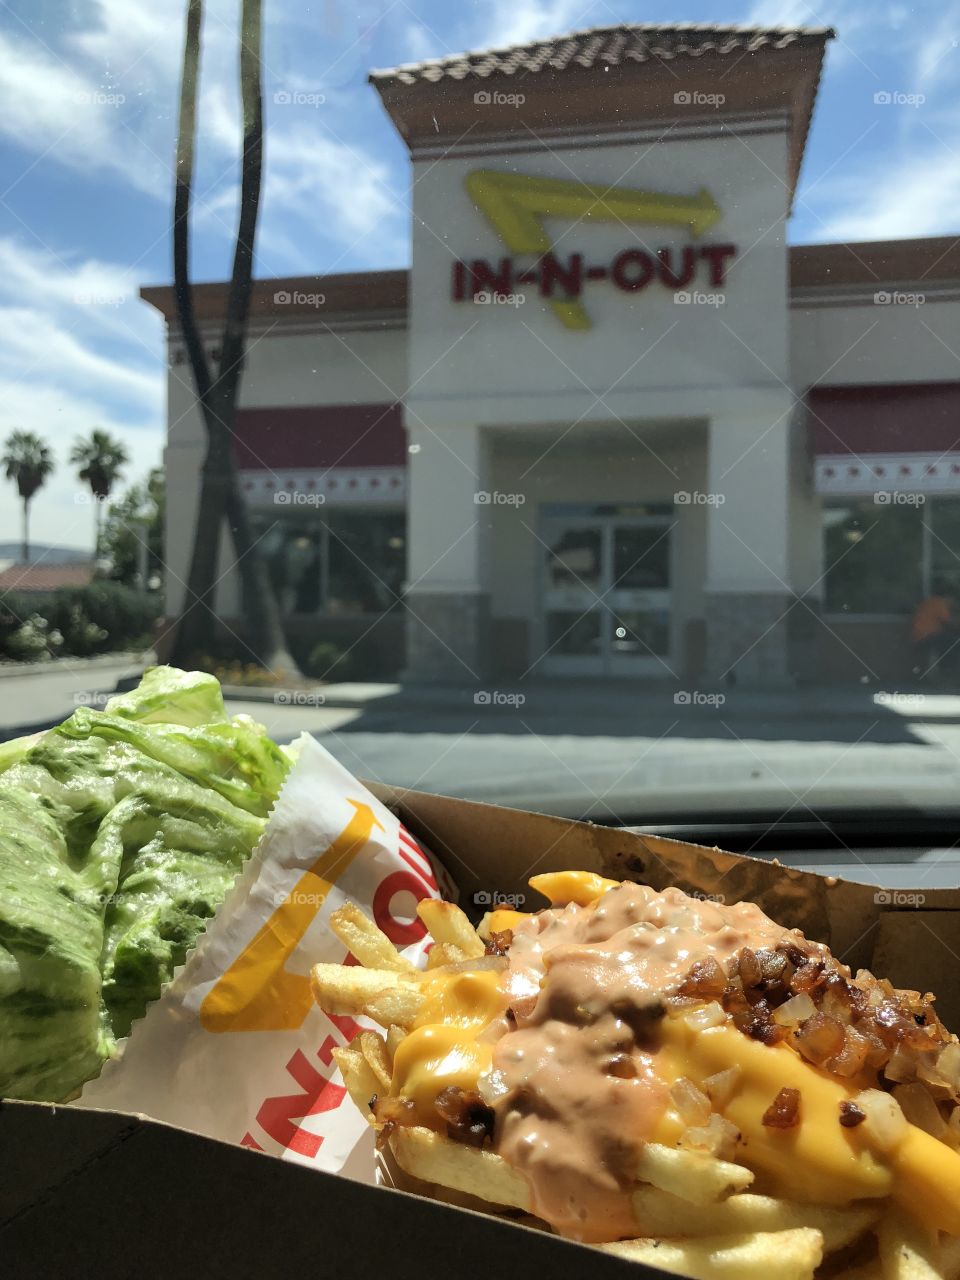 In-n-out drive thru